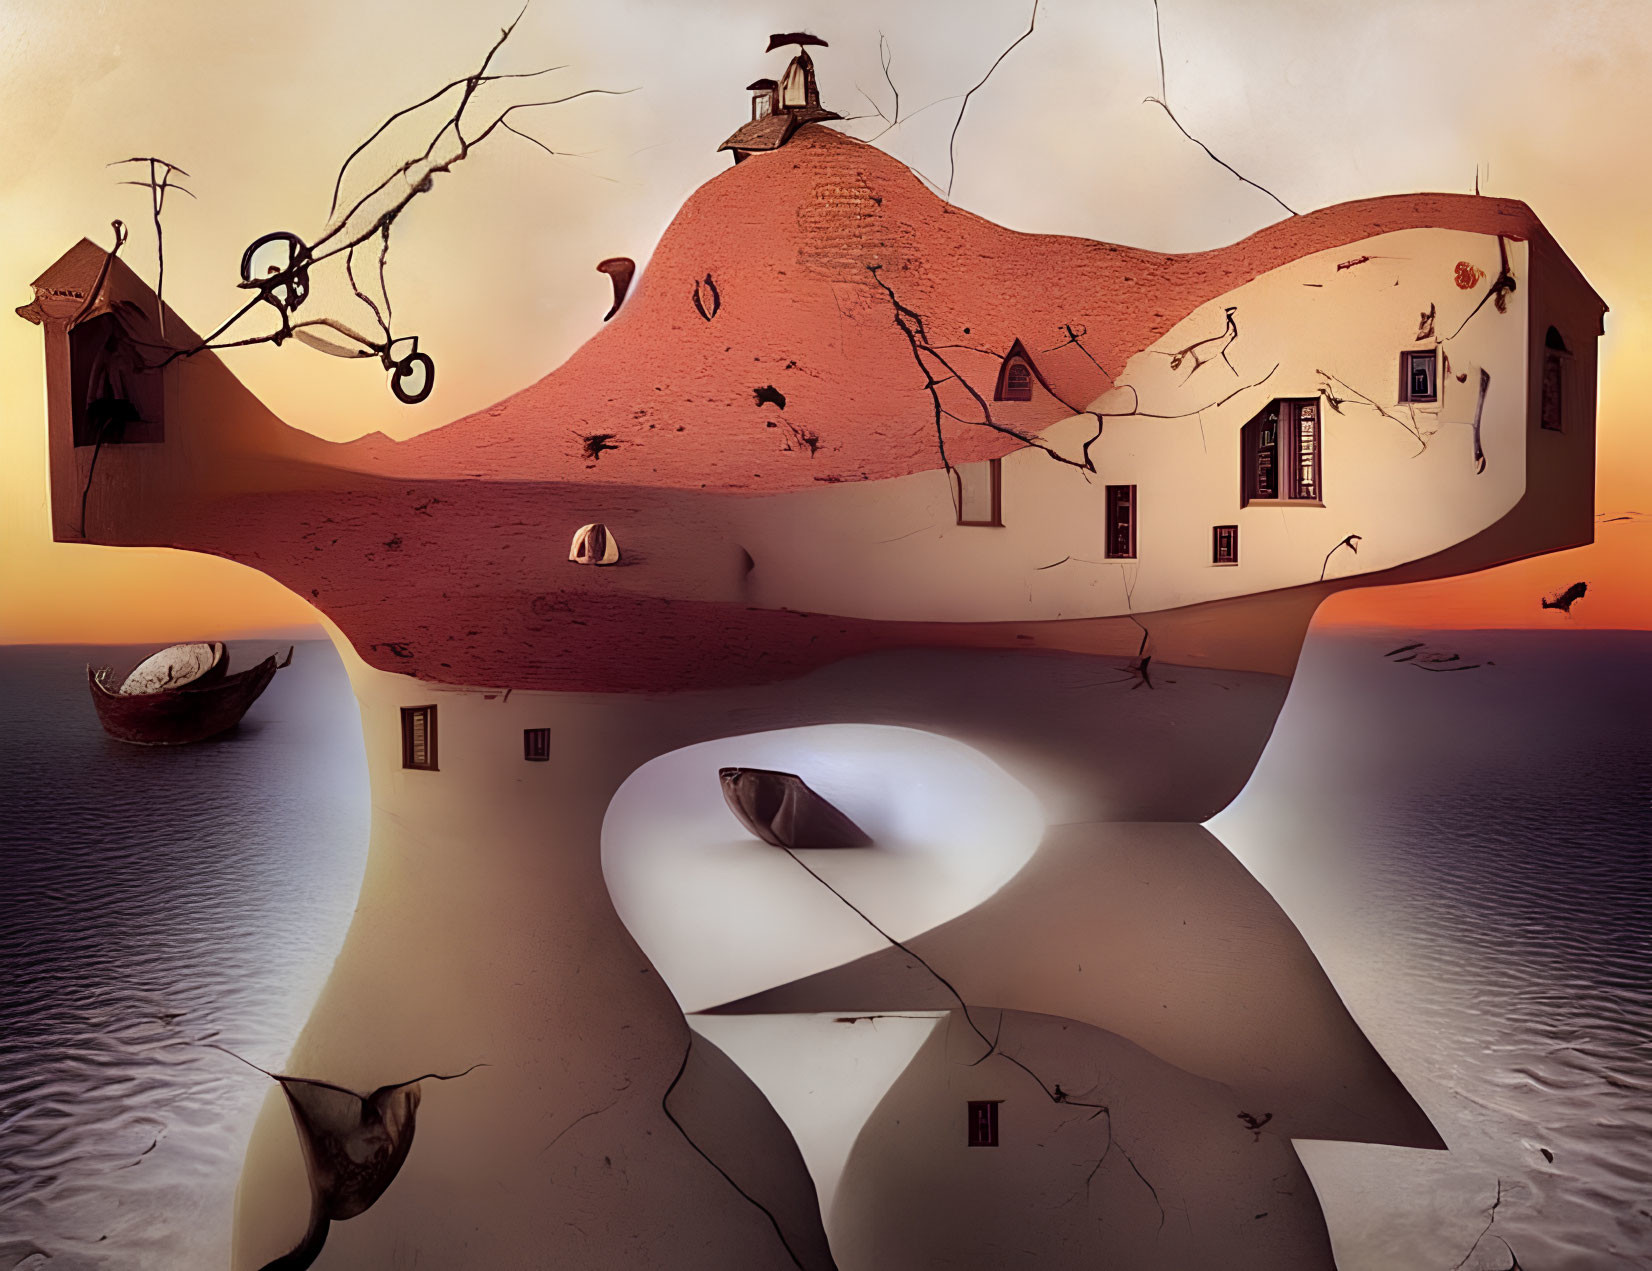 Surreal landscape with house-like structure, boat, and floating elements at sunset